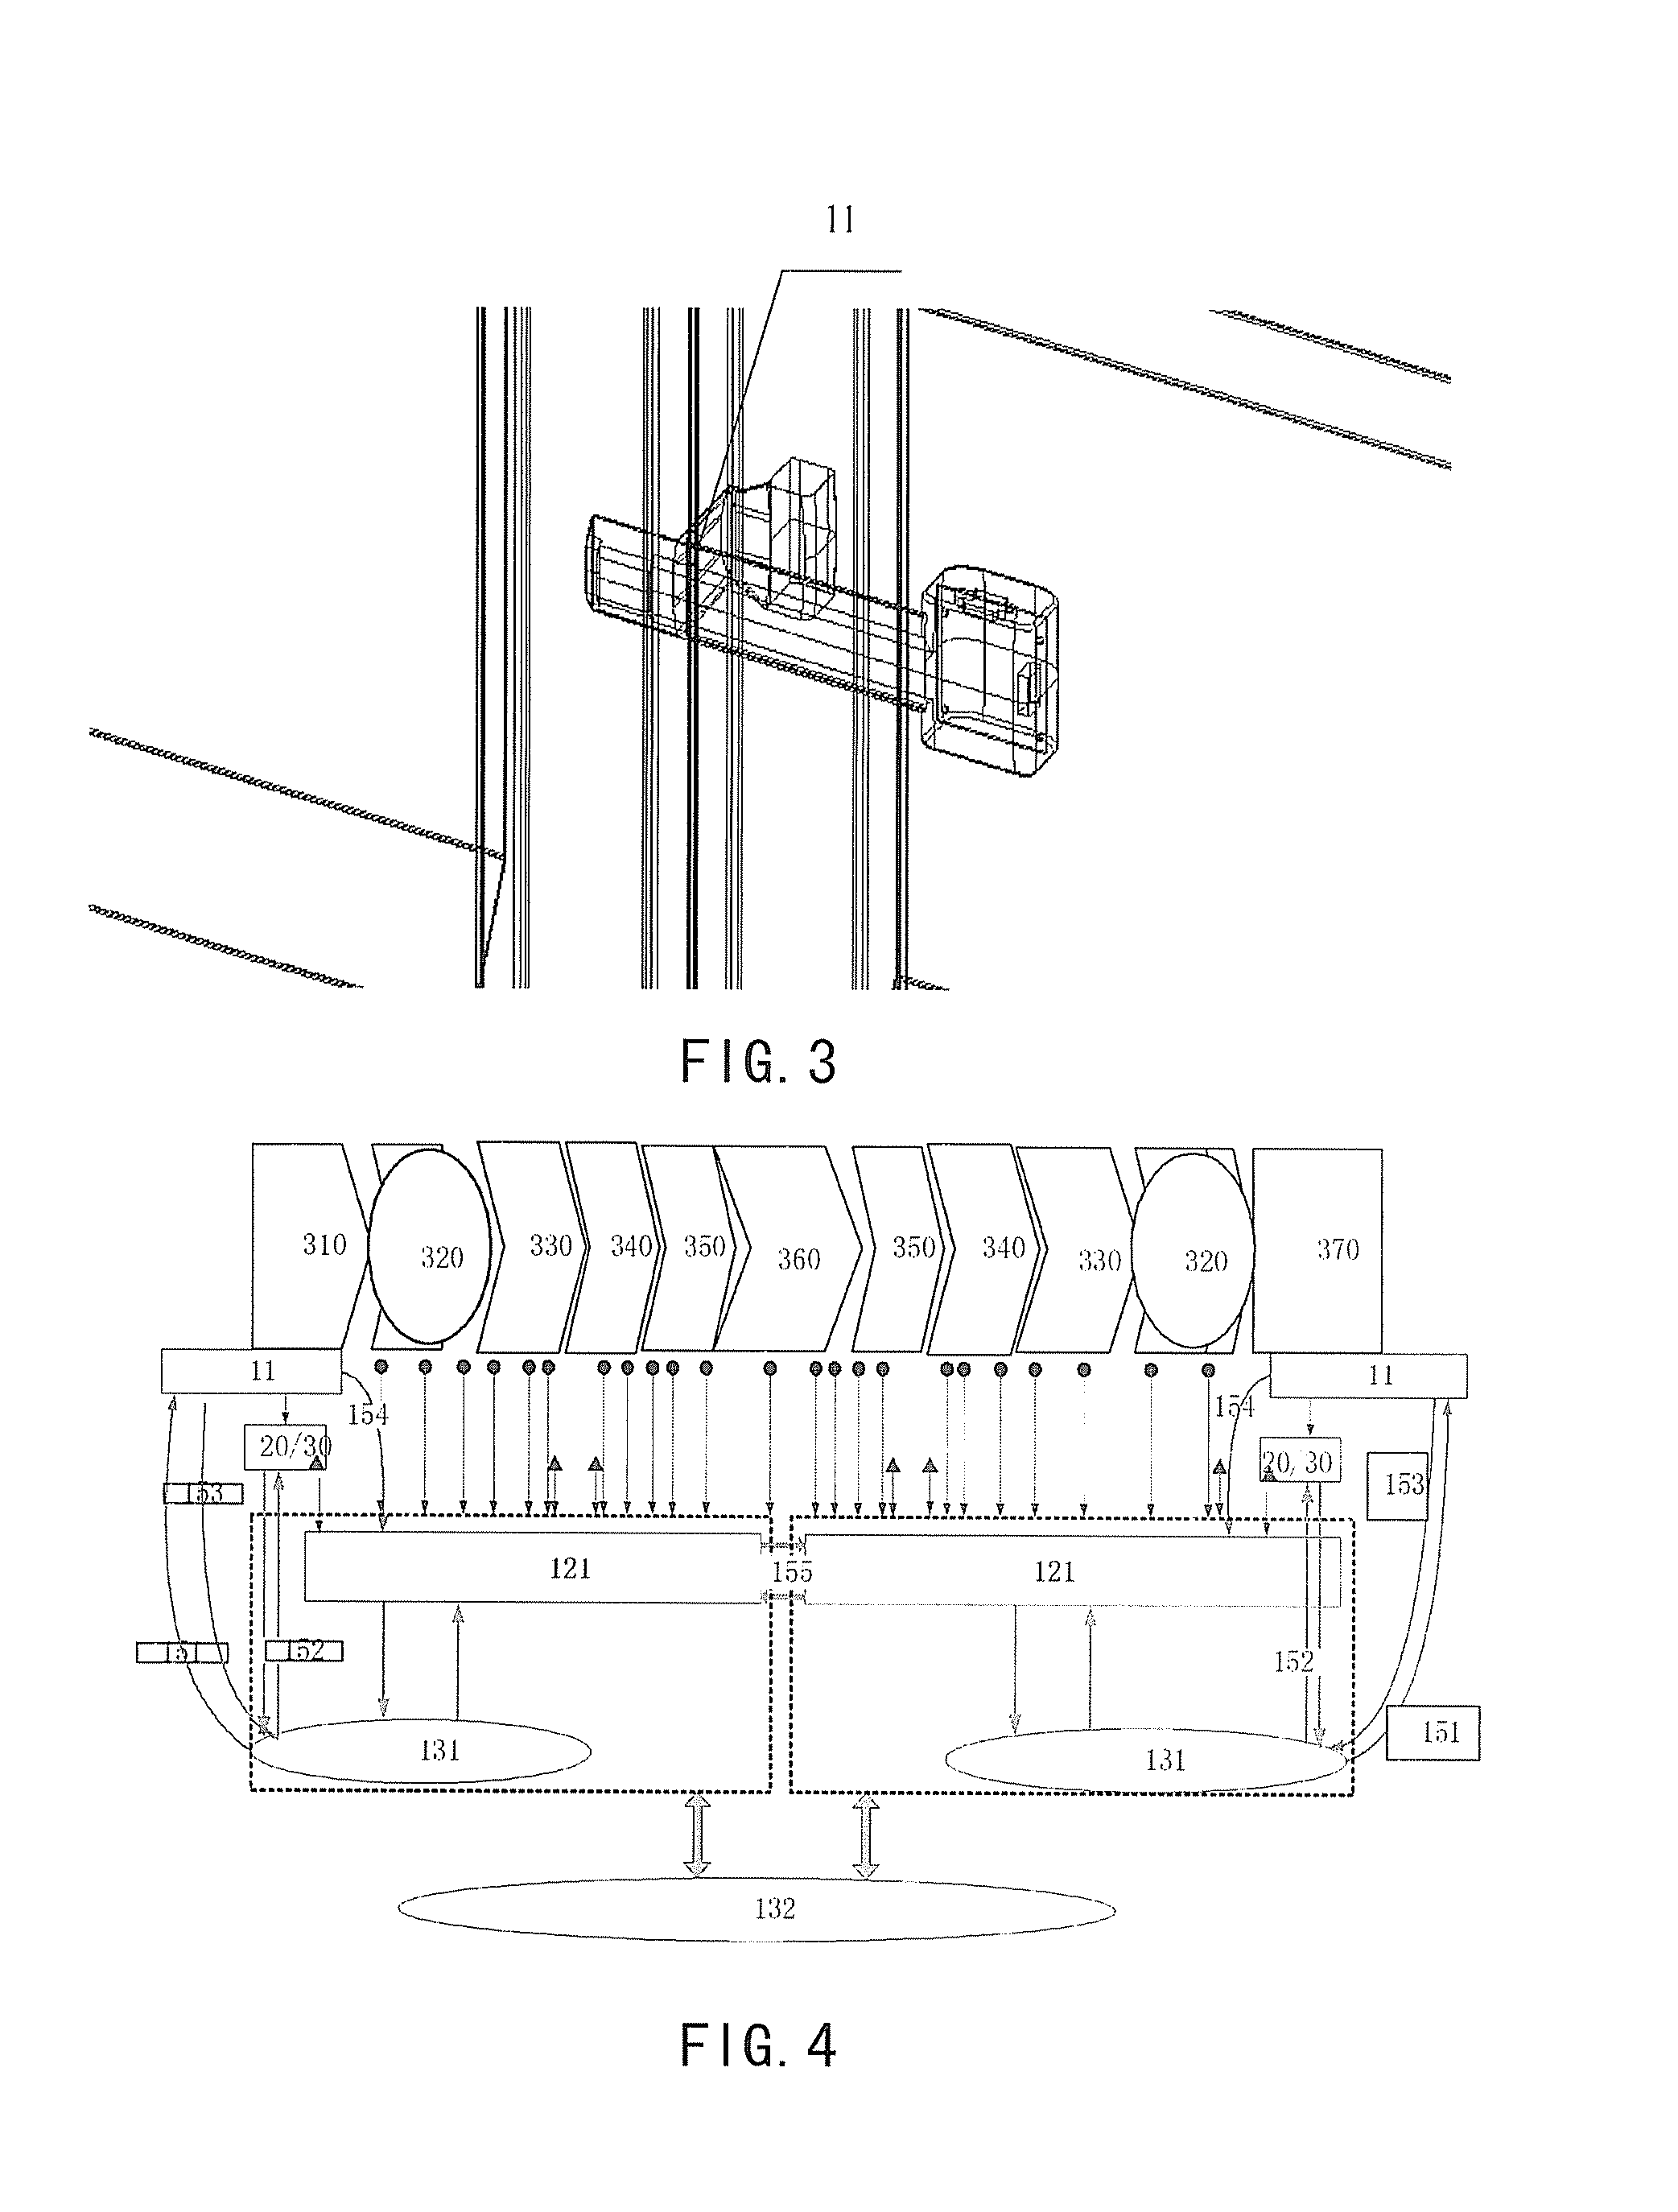 Method and system for tracking and managing cargo containers